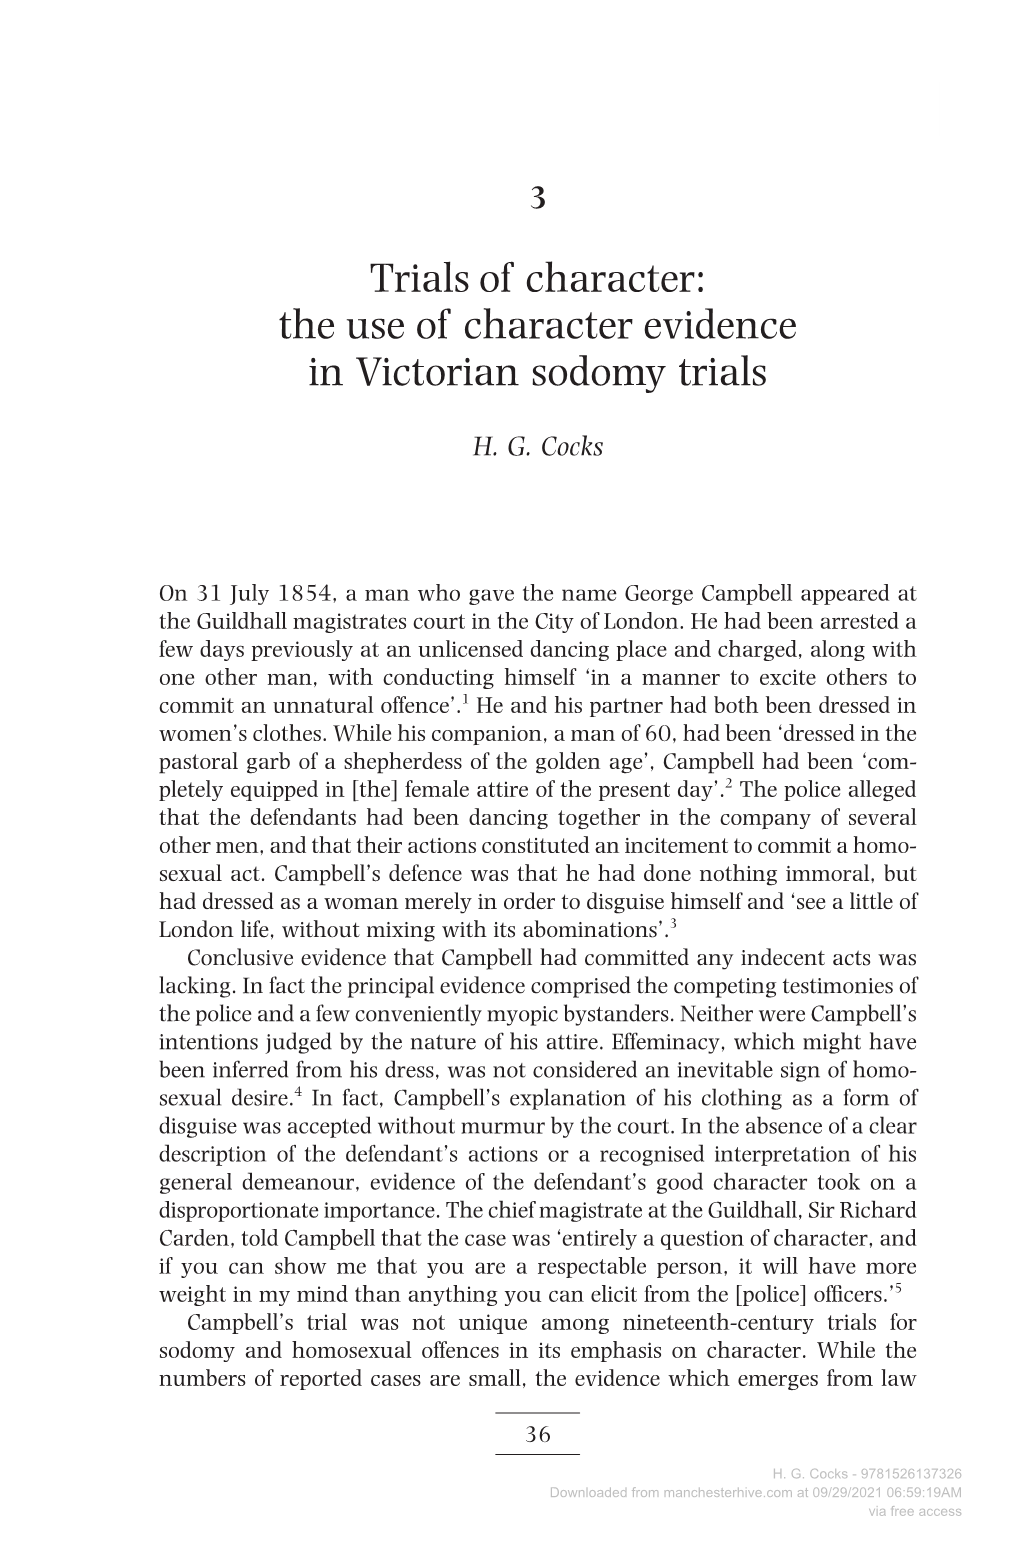 The Use of Character Evidence in Victorian Sodomy Trials